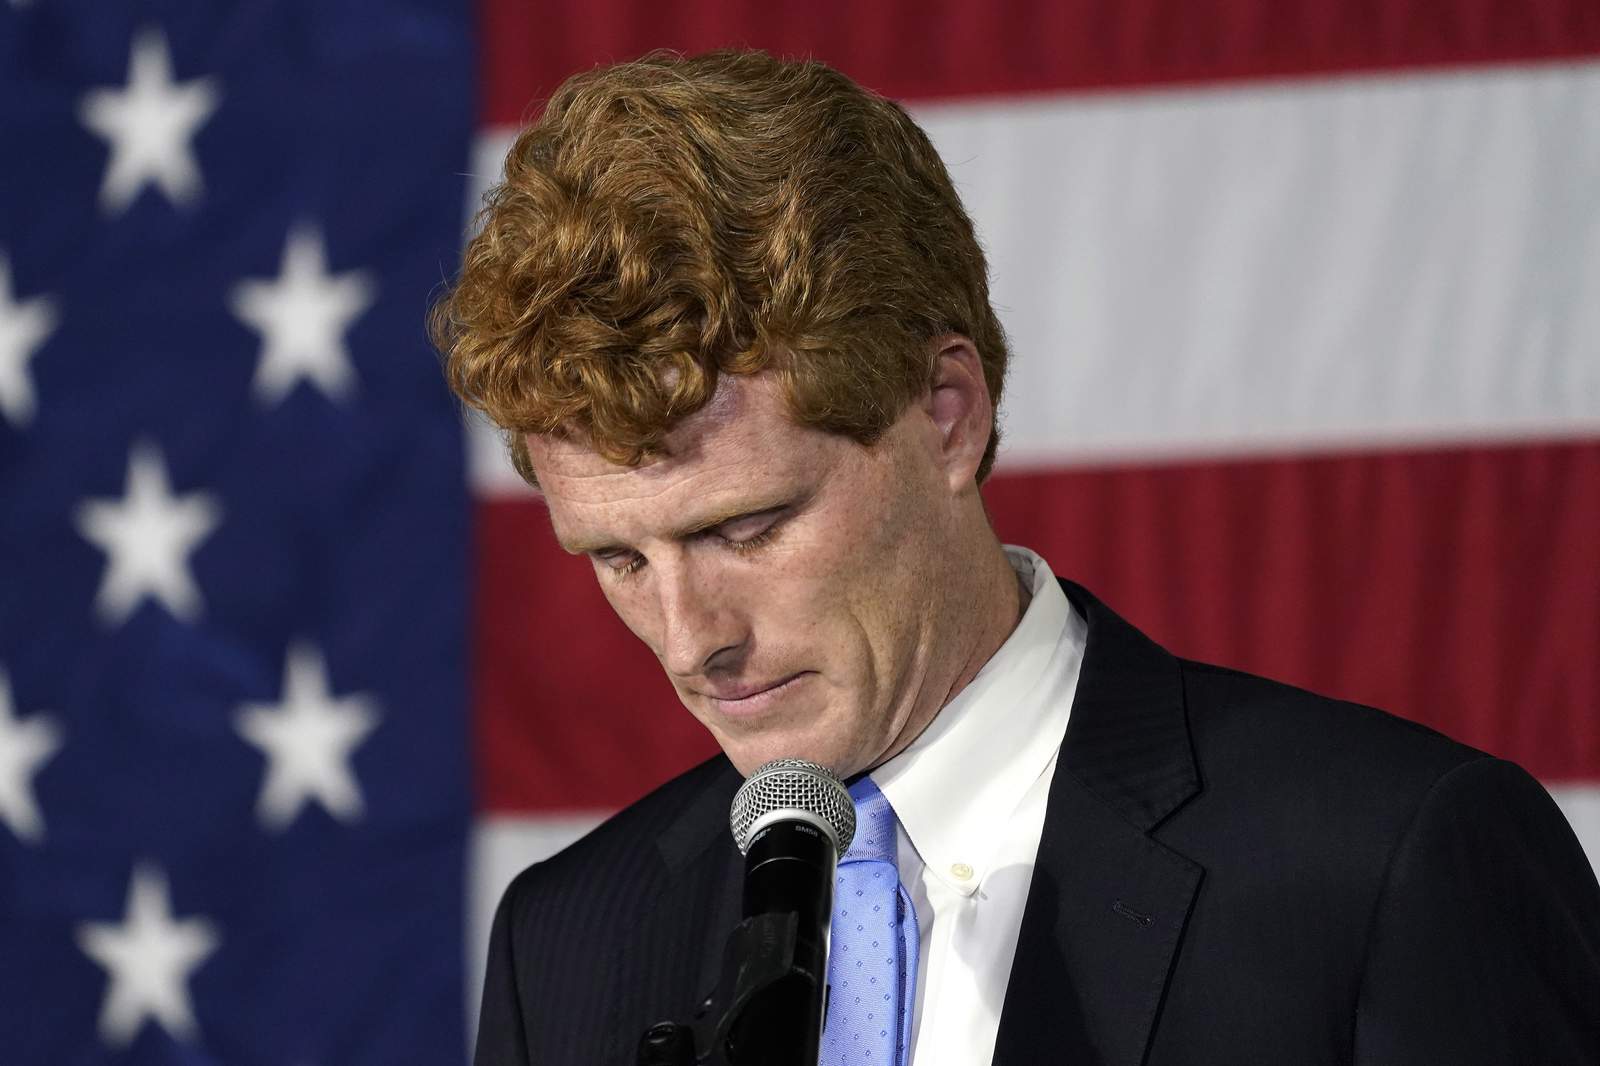 Kennedy loss in Massachusetts may mark end of 'Camelot' era